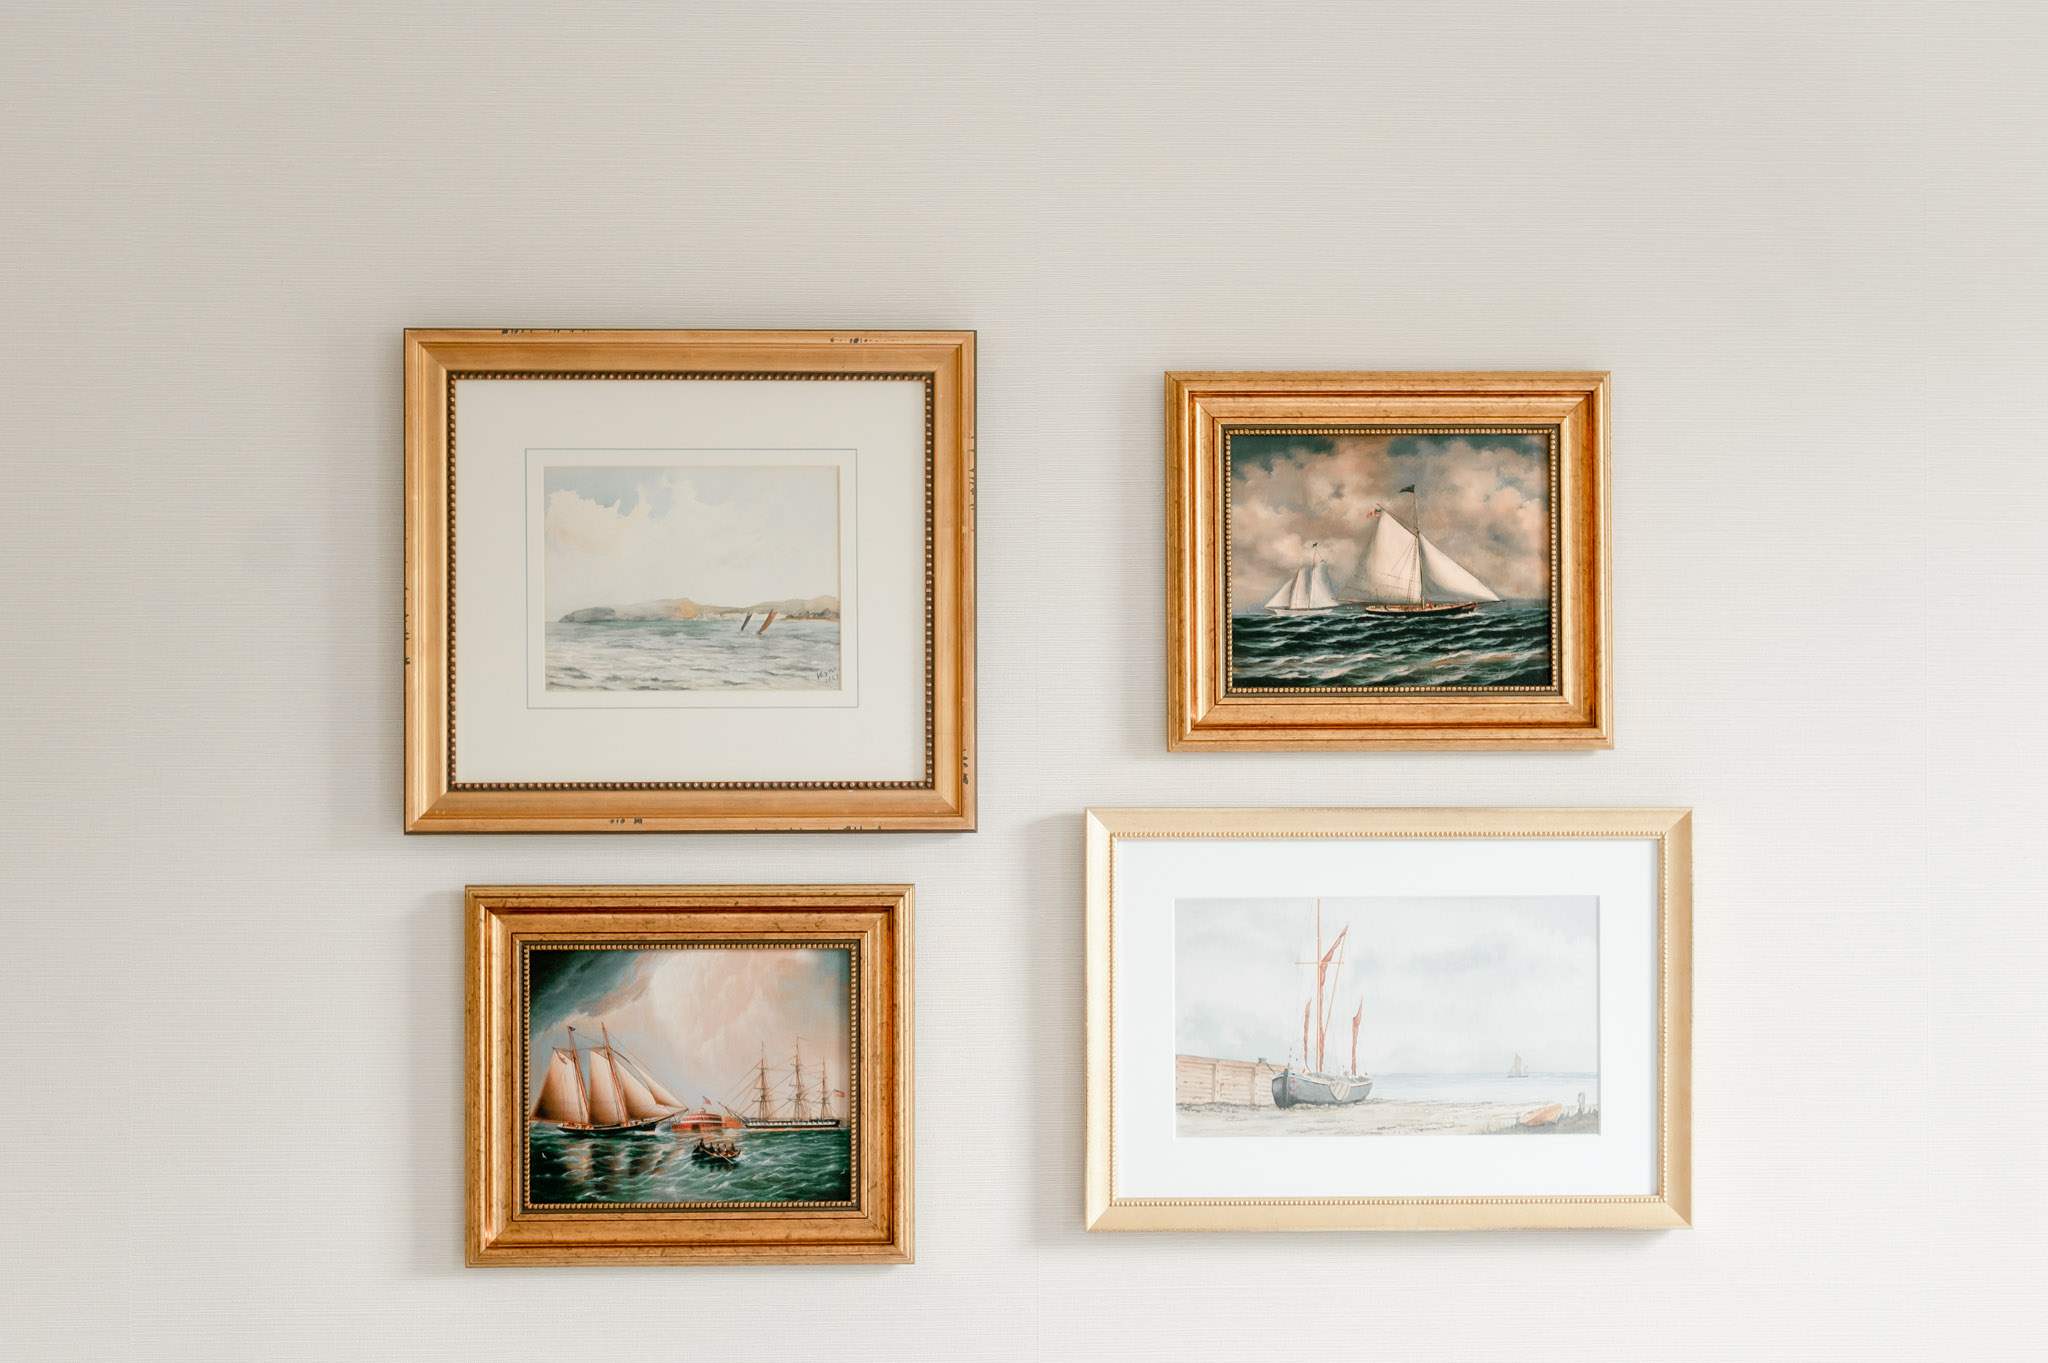 Nursery inspiration : gold frames hold paintings of sailboats